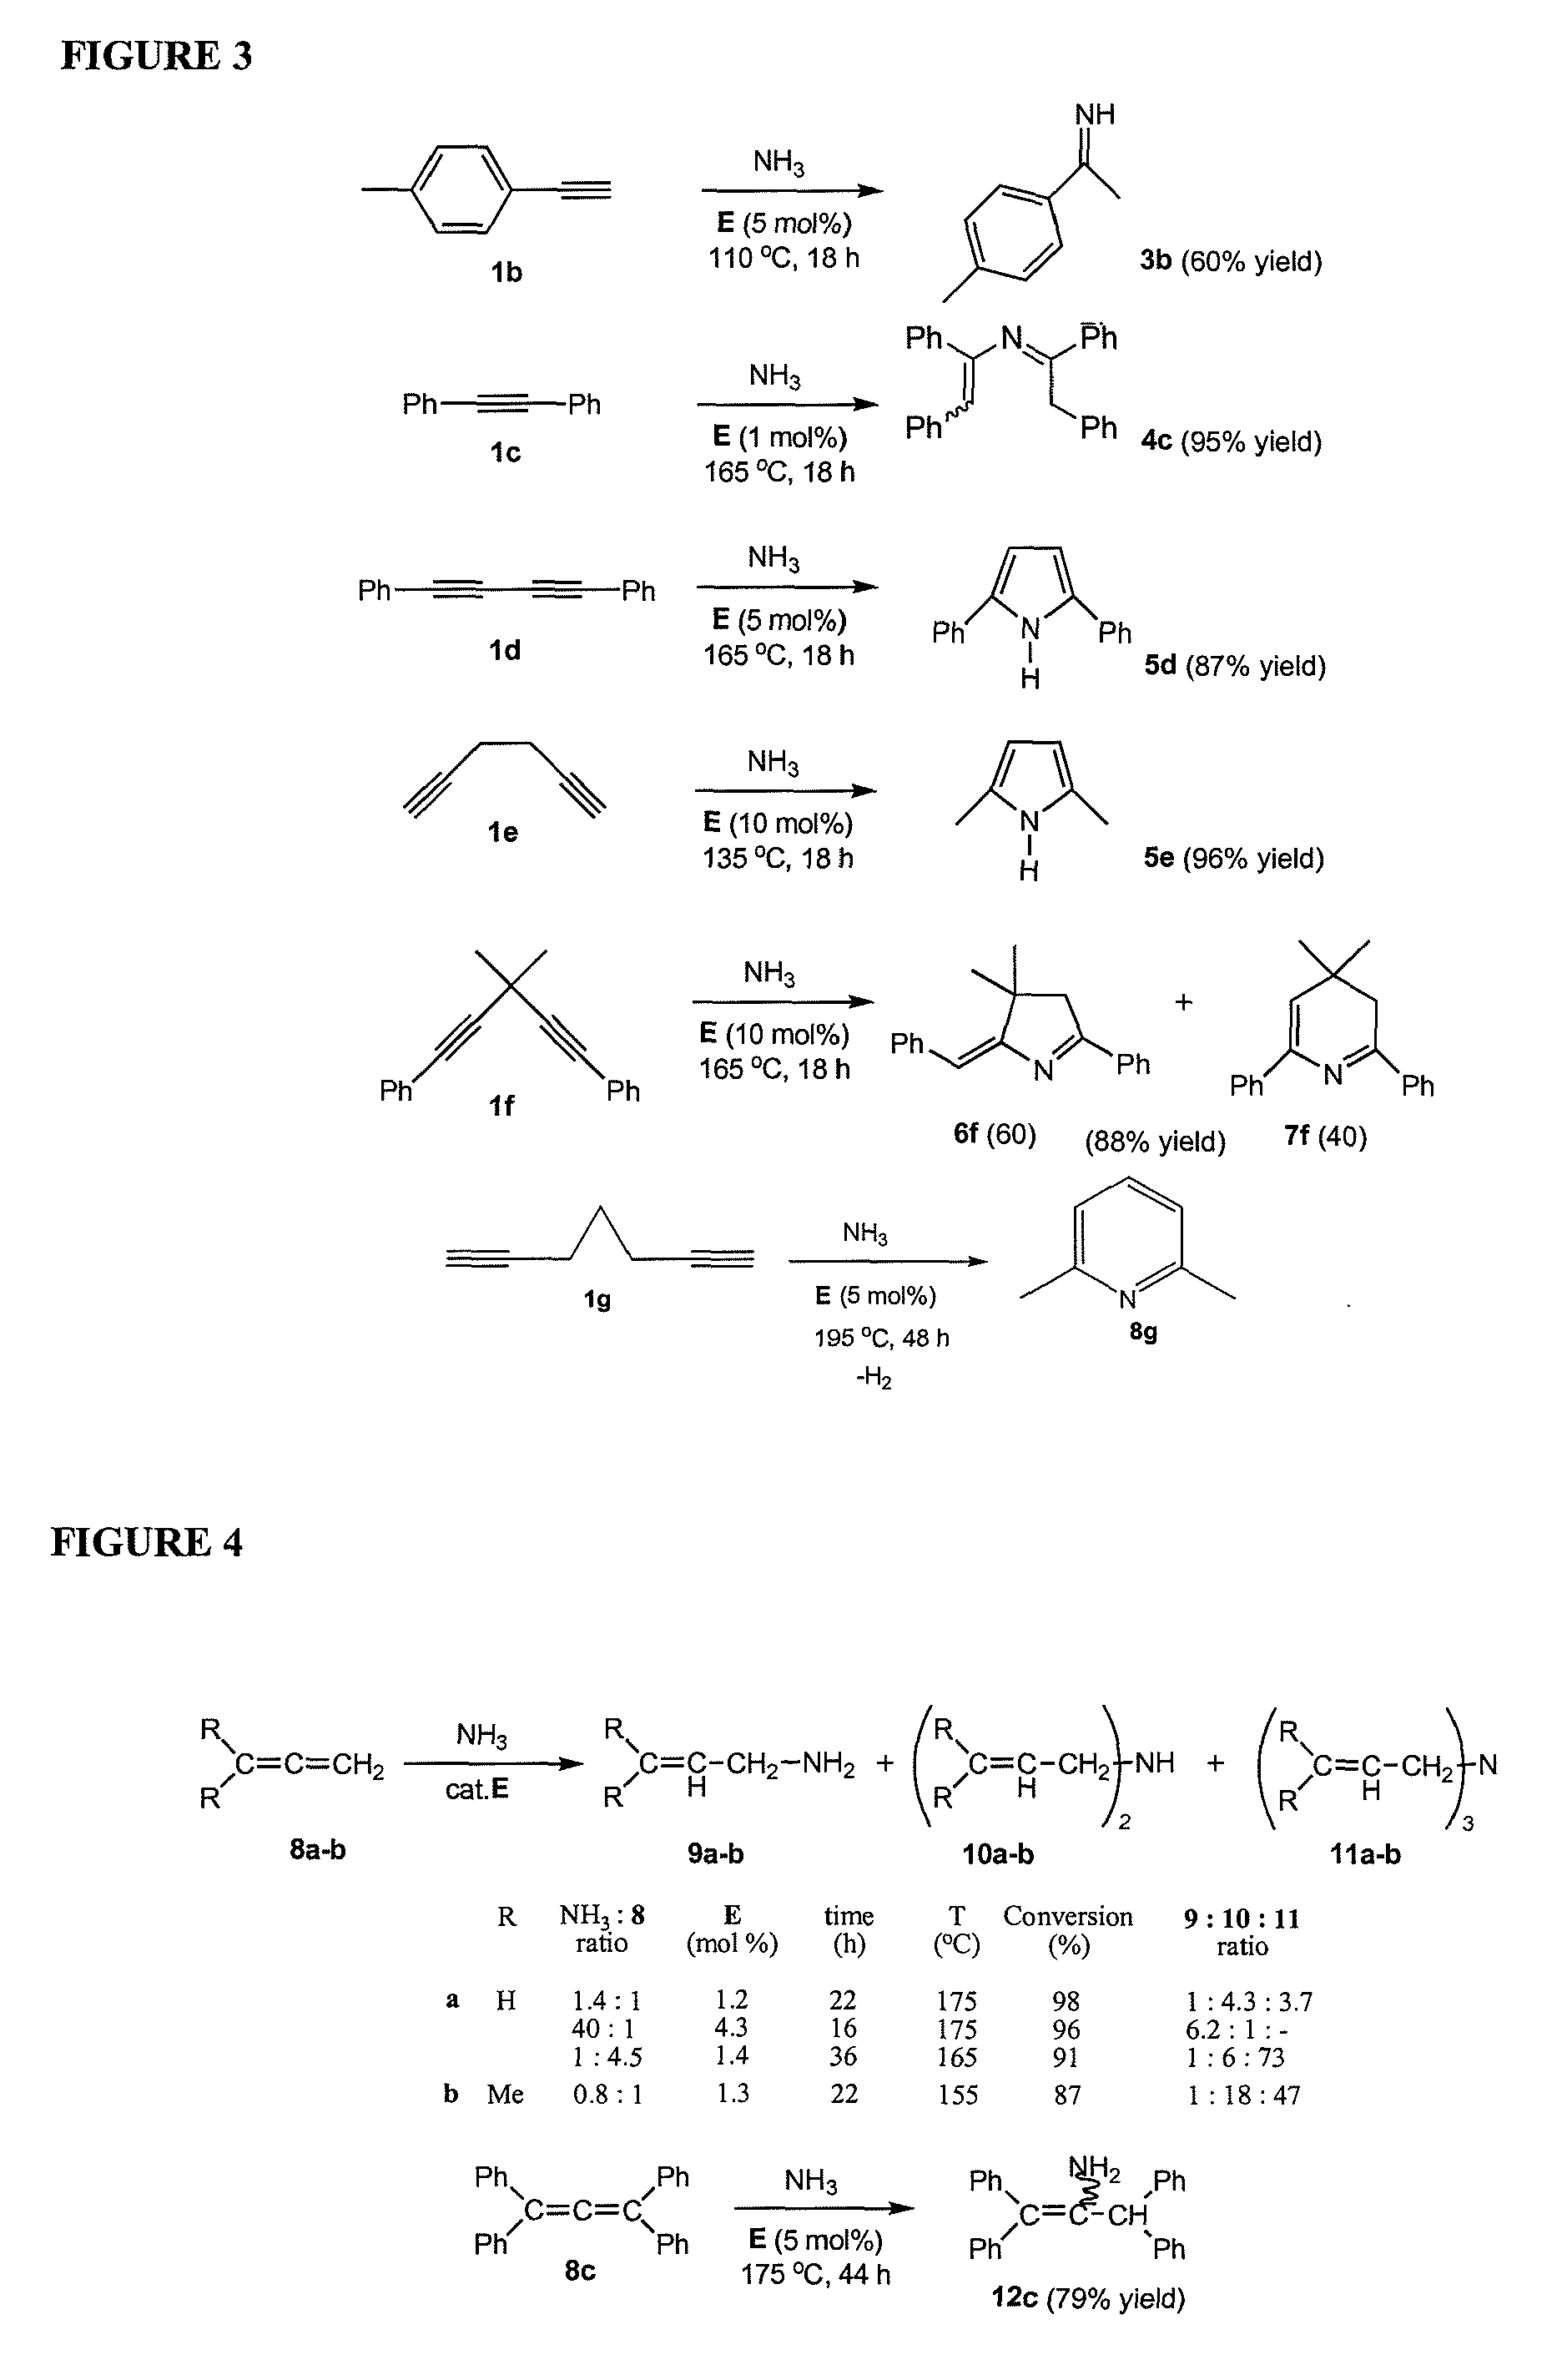 Gold catalyzed hydroamination of alkynes and allenes